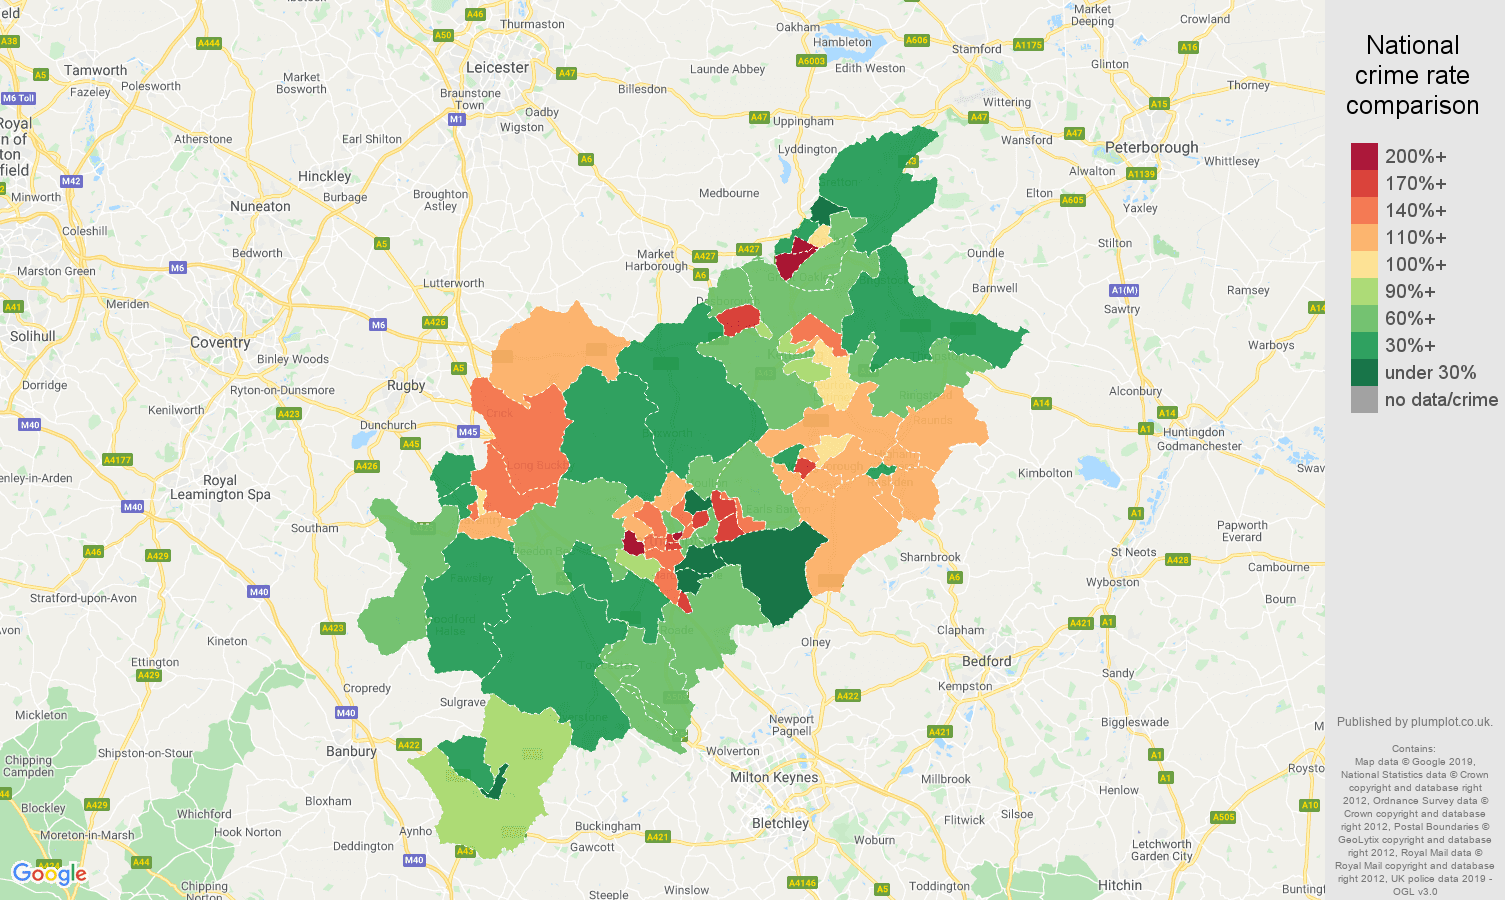 Northampton other crime rate comparison map